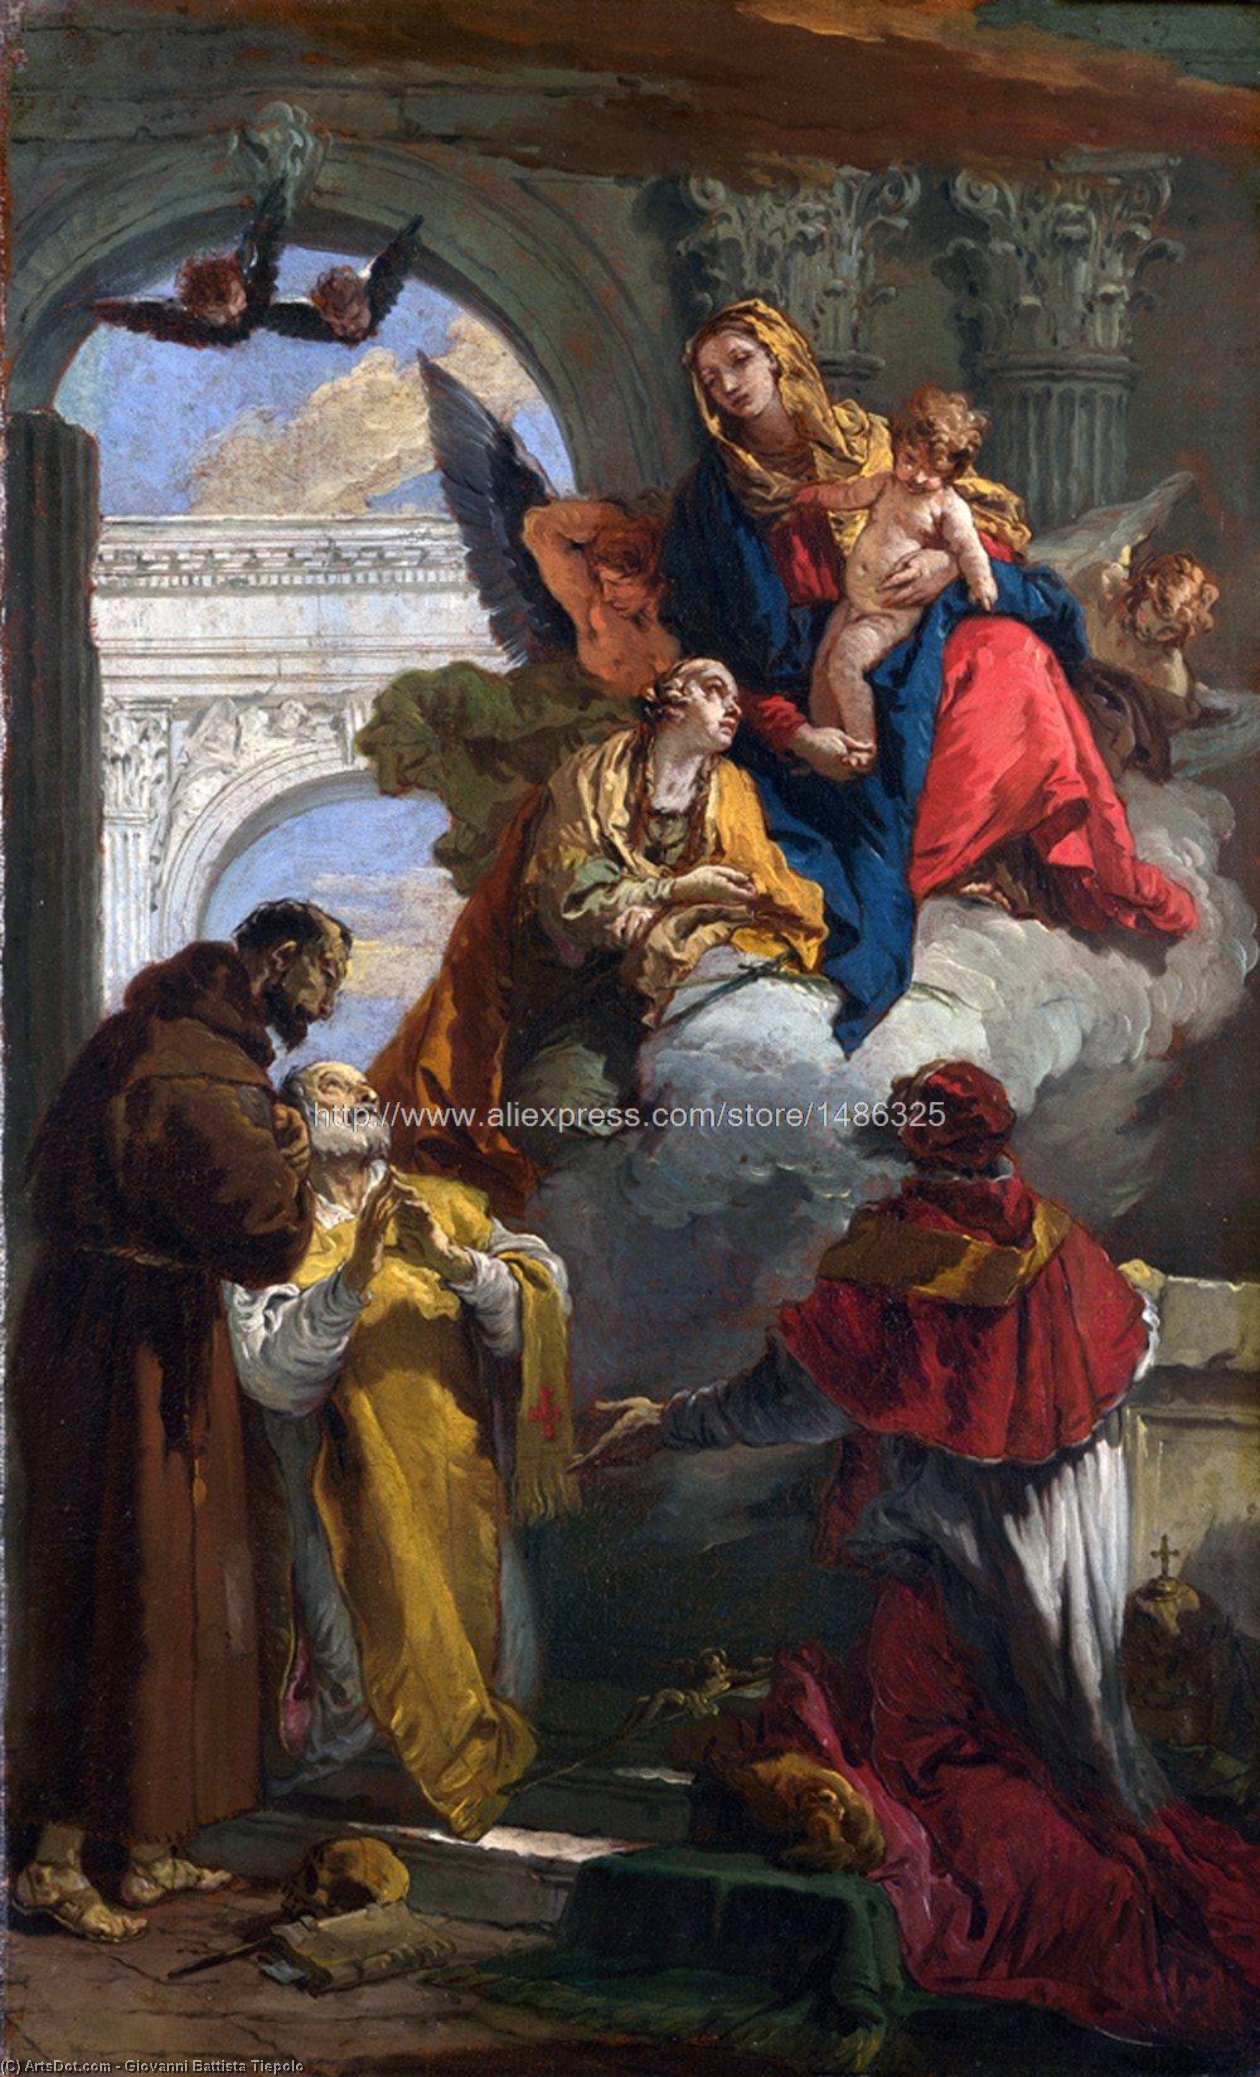 Buy Museum Art Reproductions The Virgin and Child appearing to a Group of Saints by Giovanni Battista Tiepolo (2007-1770, Italy) | ArtsDot.com